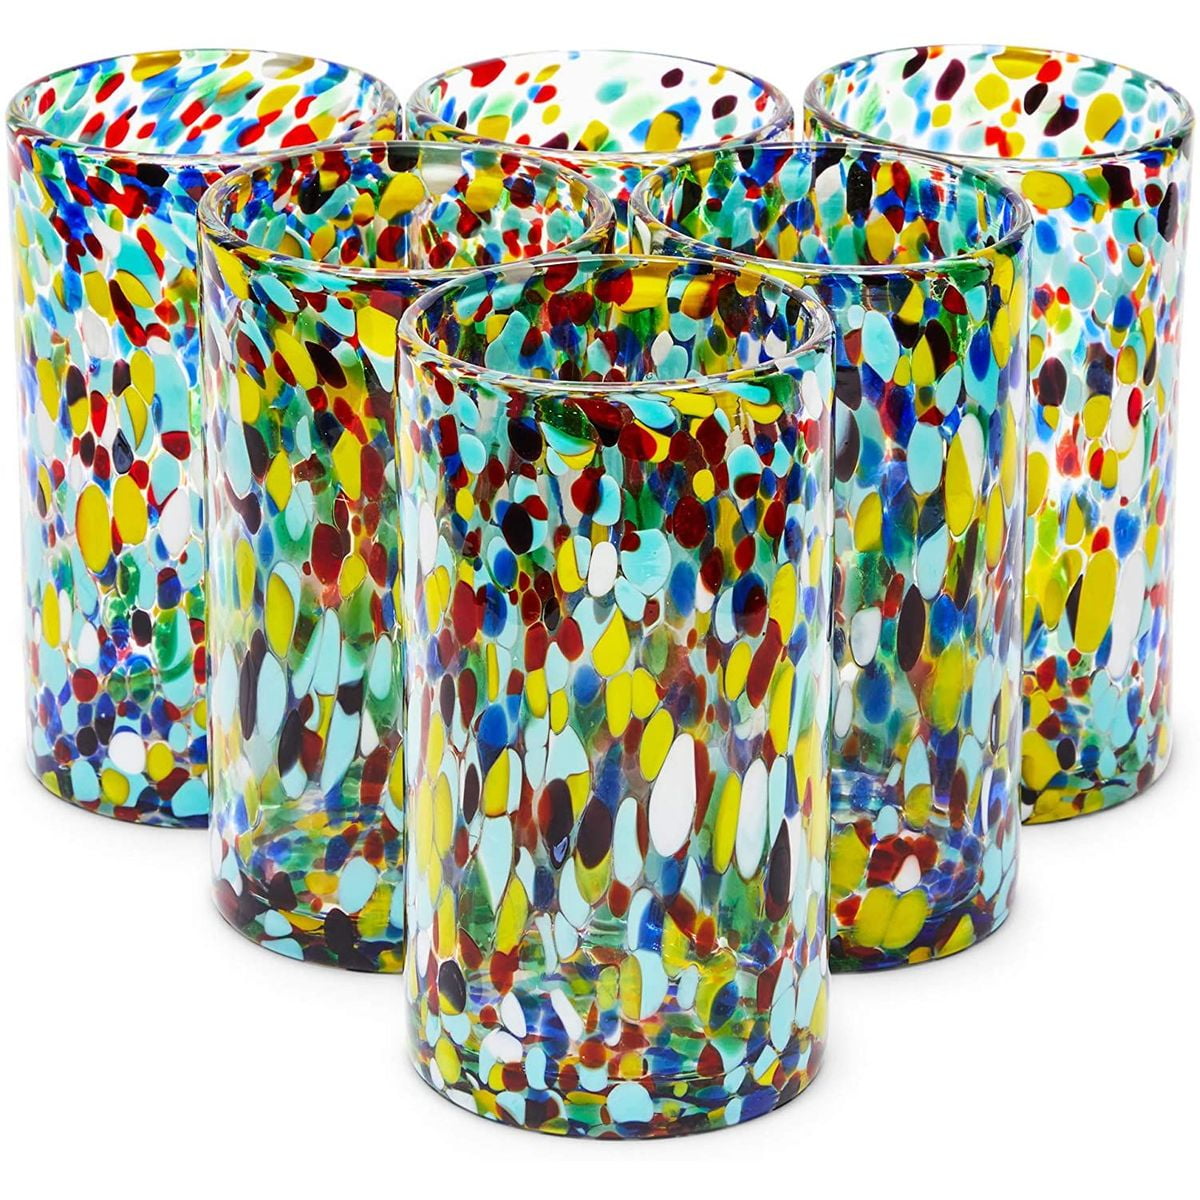 MexHandcraft Set of 6 Mexican Blown Glass Drinking Glasses Confetti Rocks